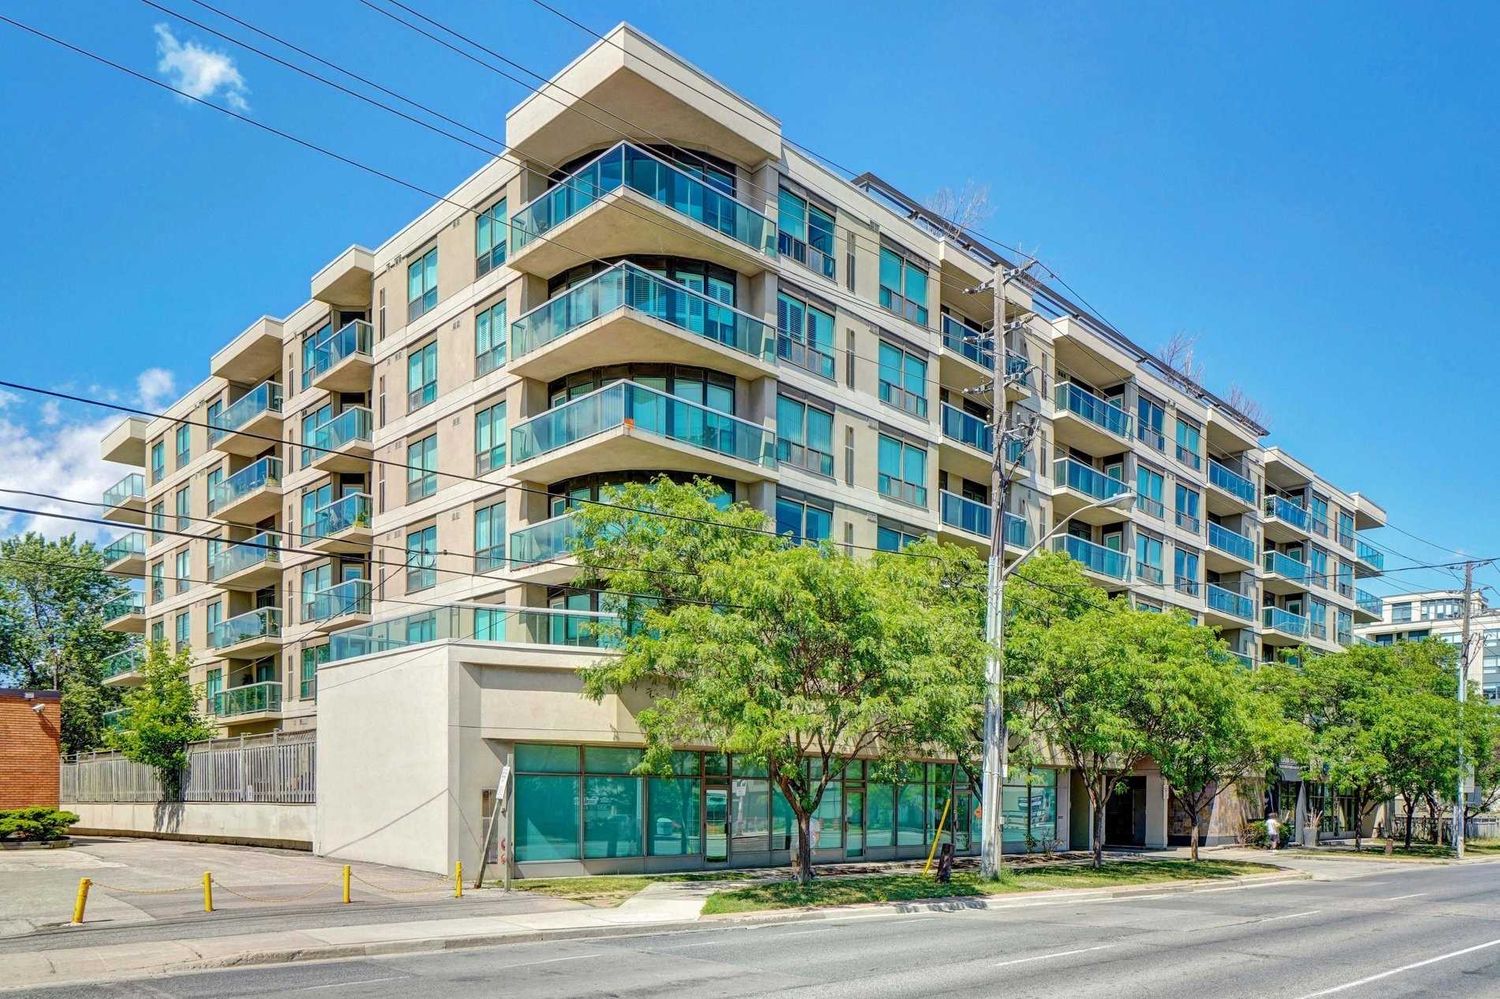 890 Sheppard Avenue W. Plaza Suites Condos is located in  North York, Toronto - image #1 of 3